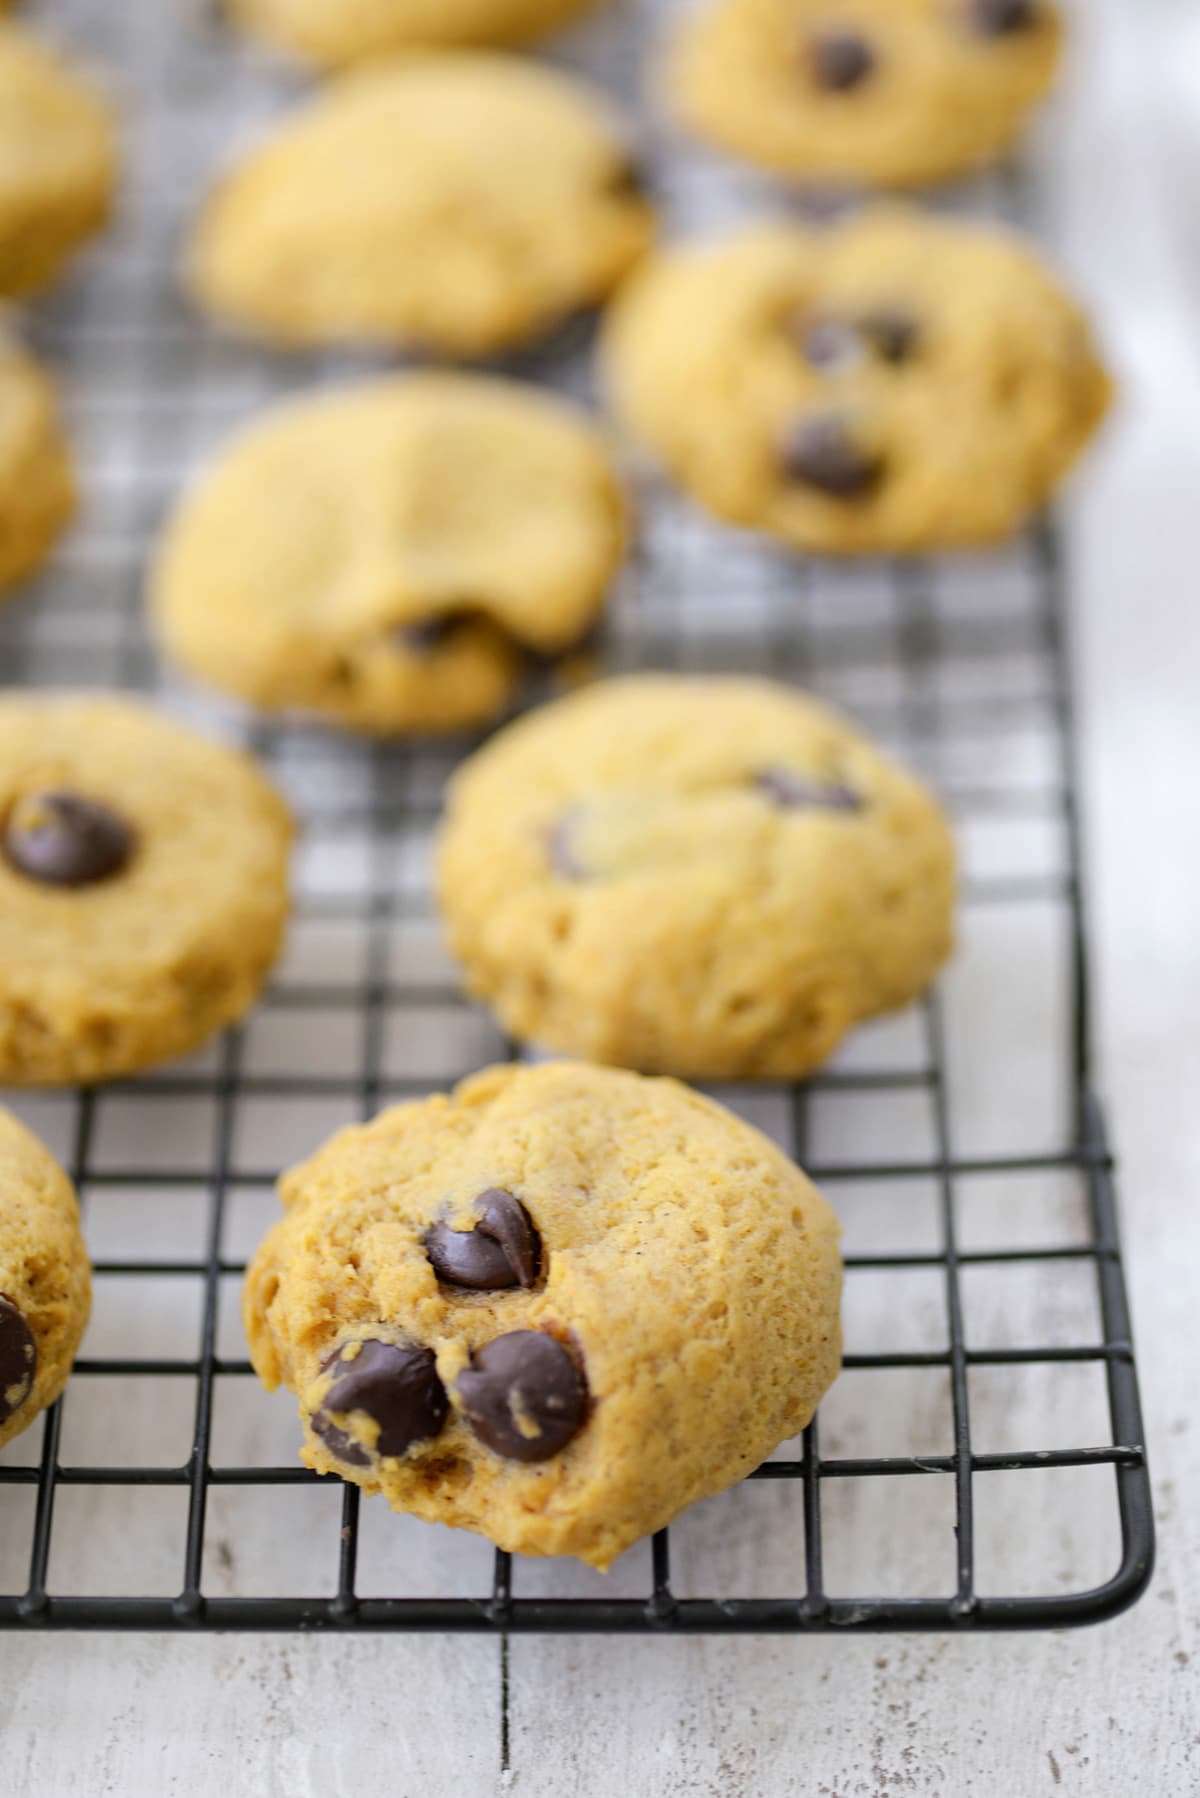 Oh So Chewy Pumpkin Chocolate Chip Cookies by Ashley Rose of Sugar & Cloth, a top lifestyle blog in Houston, Texas